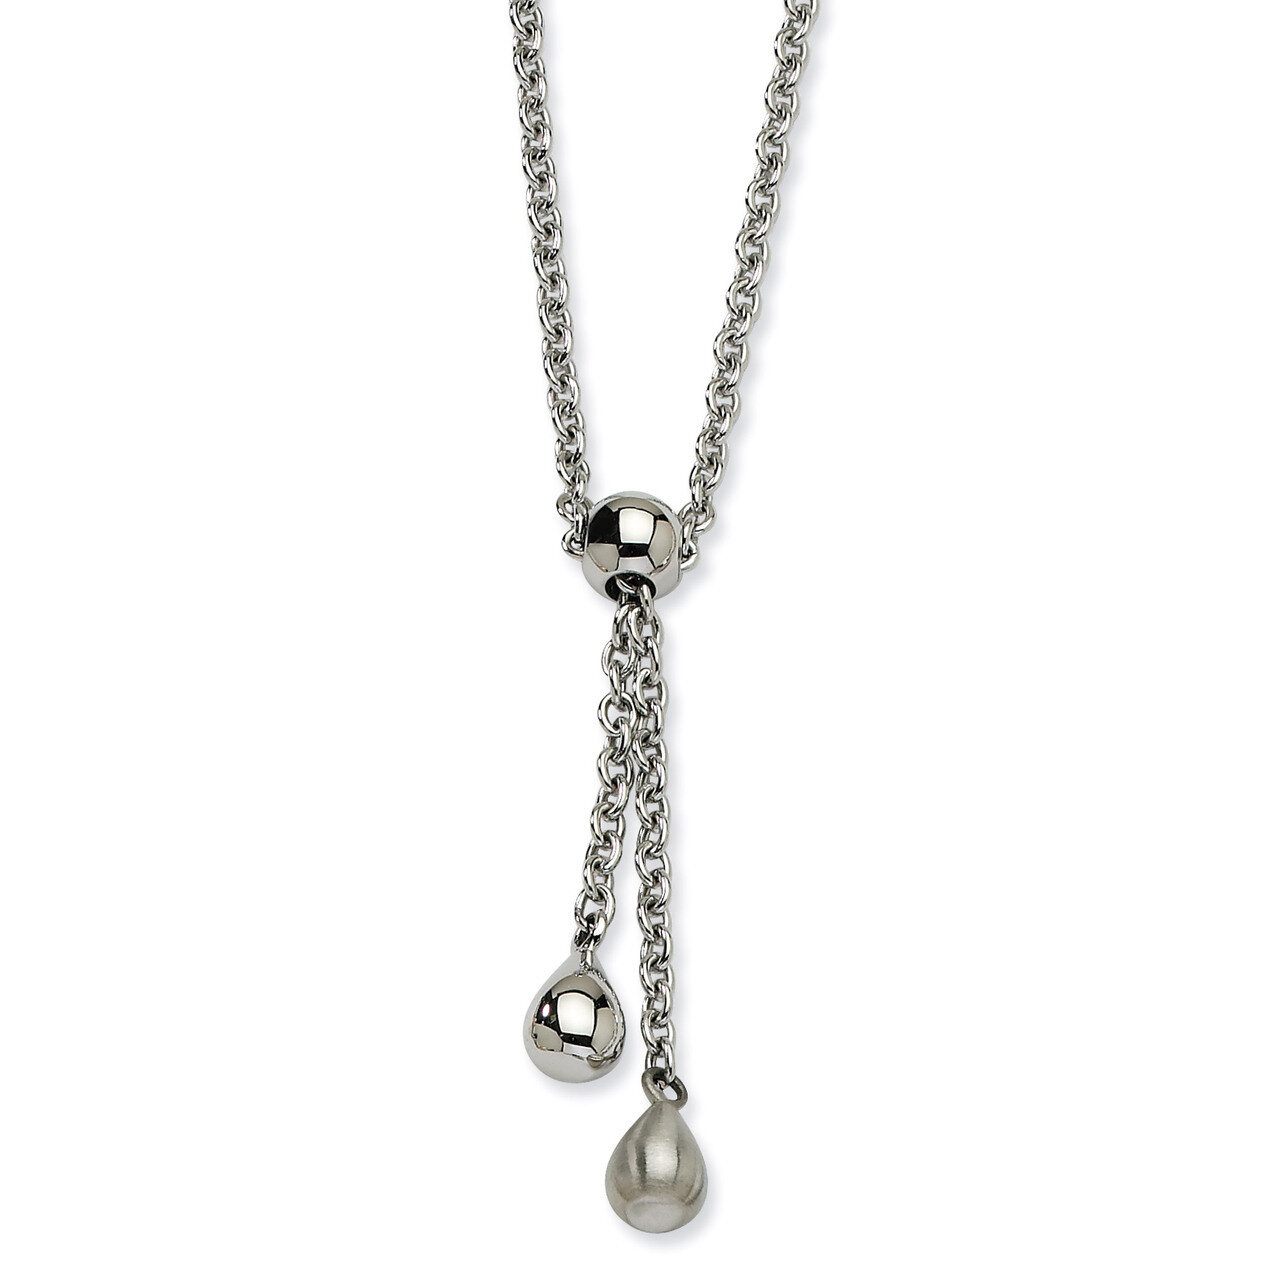 Brushed & Polished Teardrop 20 Inch Y Necklace - Stainless Steel SRN581